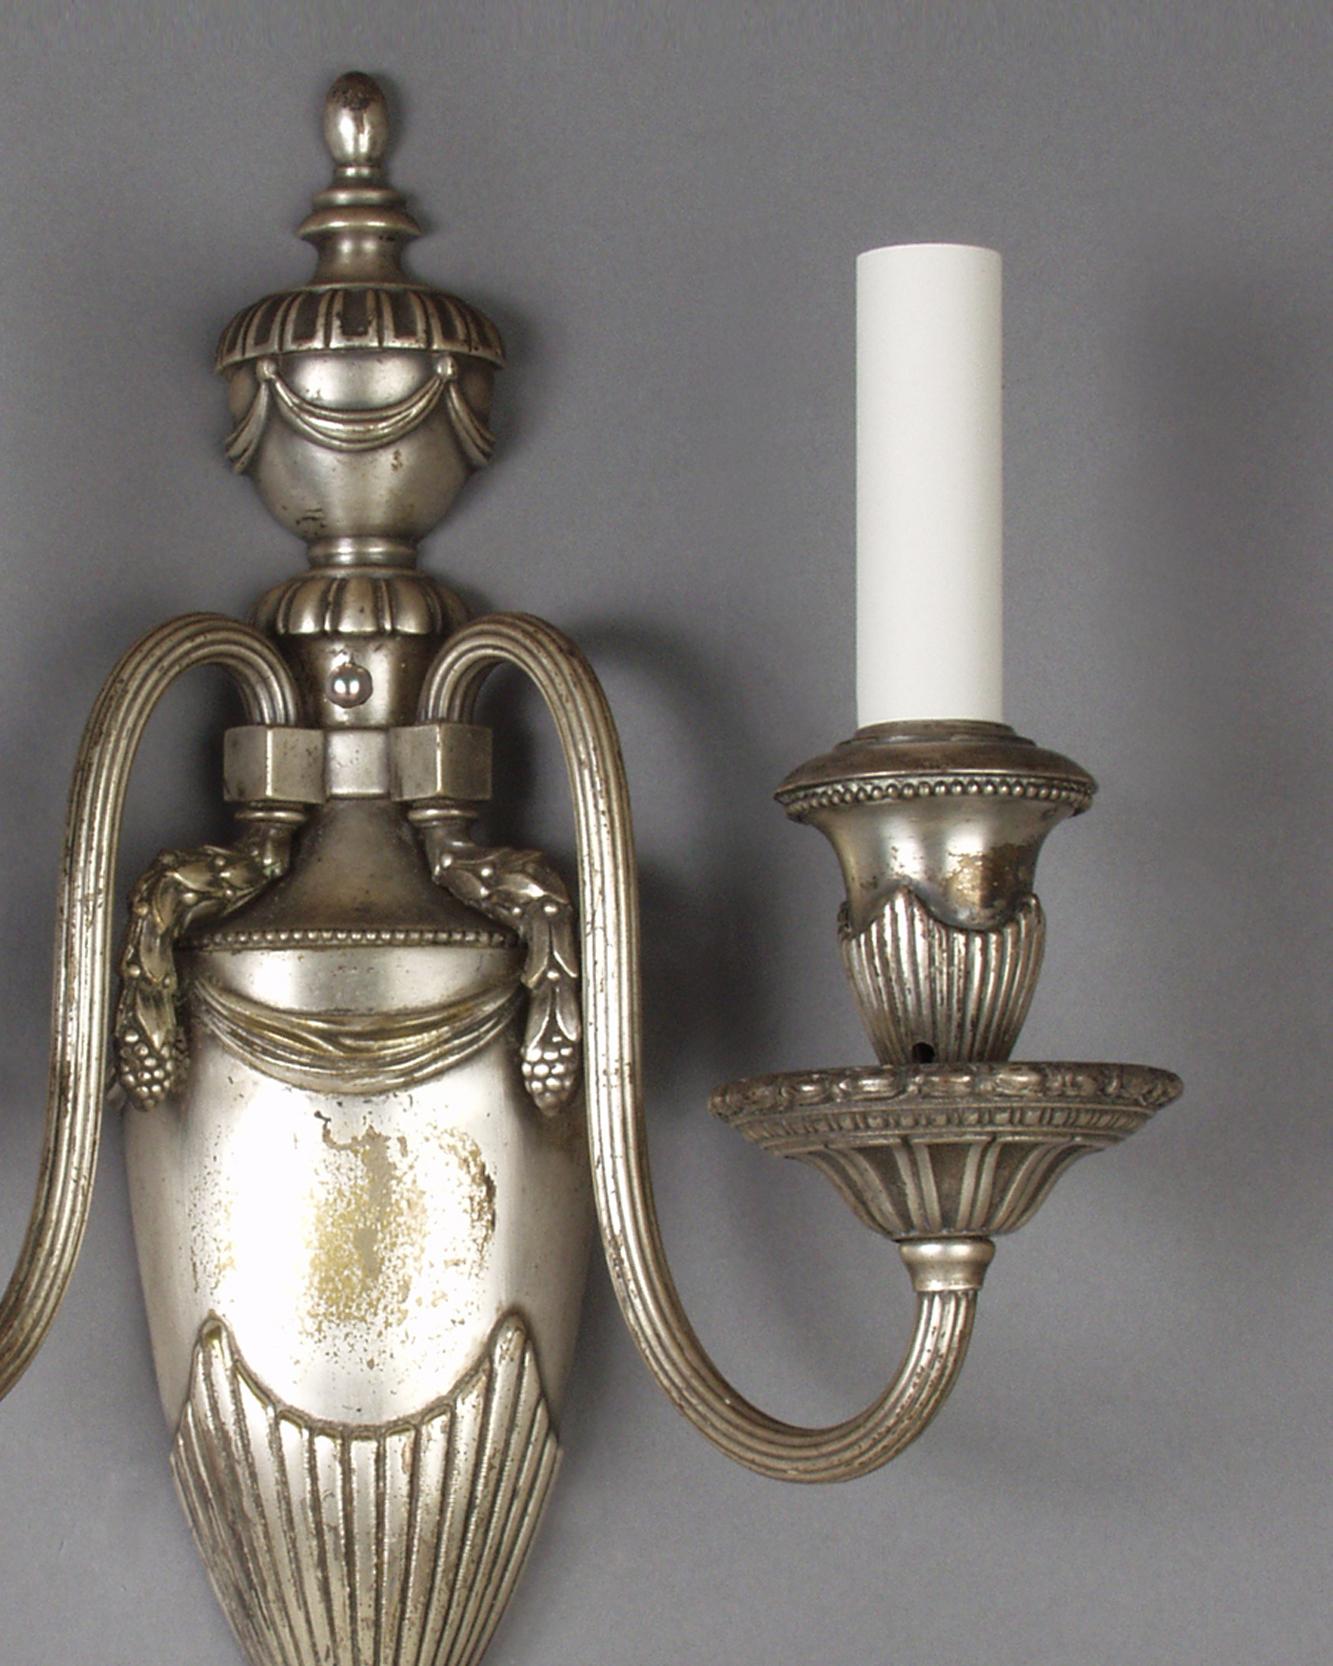 Baroque Gadrooned and Reeded Silverplated Bronze Sconces by Bradley & Hubbard, c. 1910s For Sale